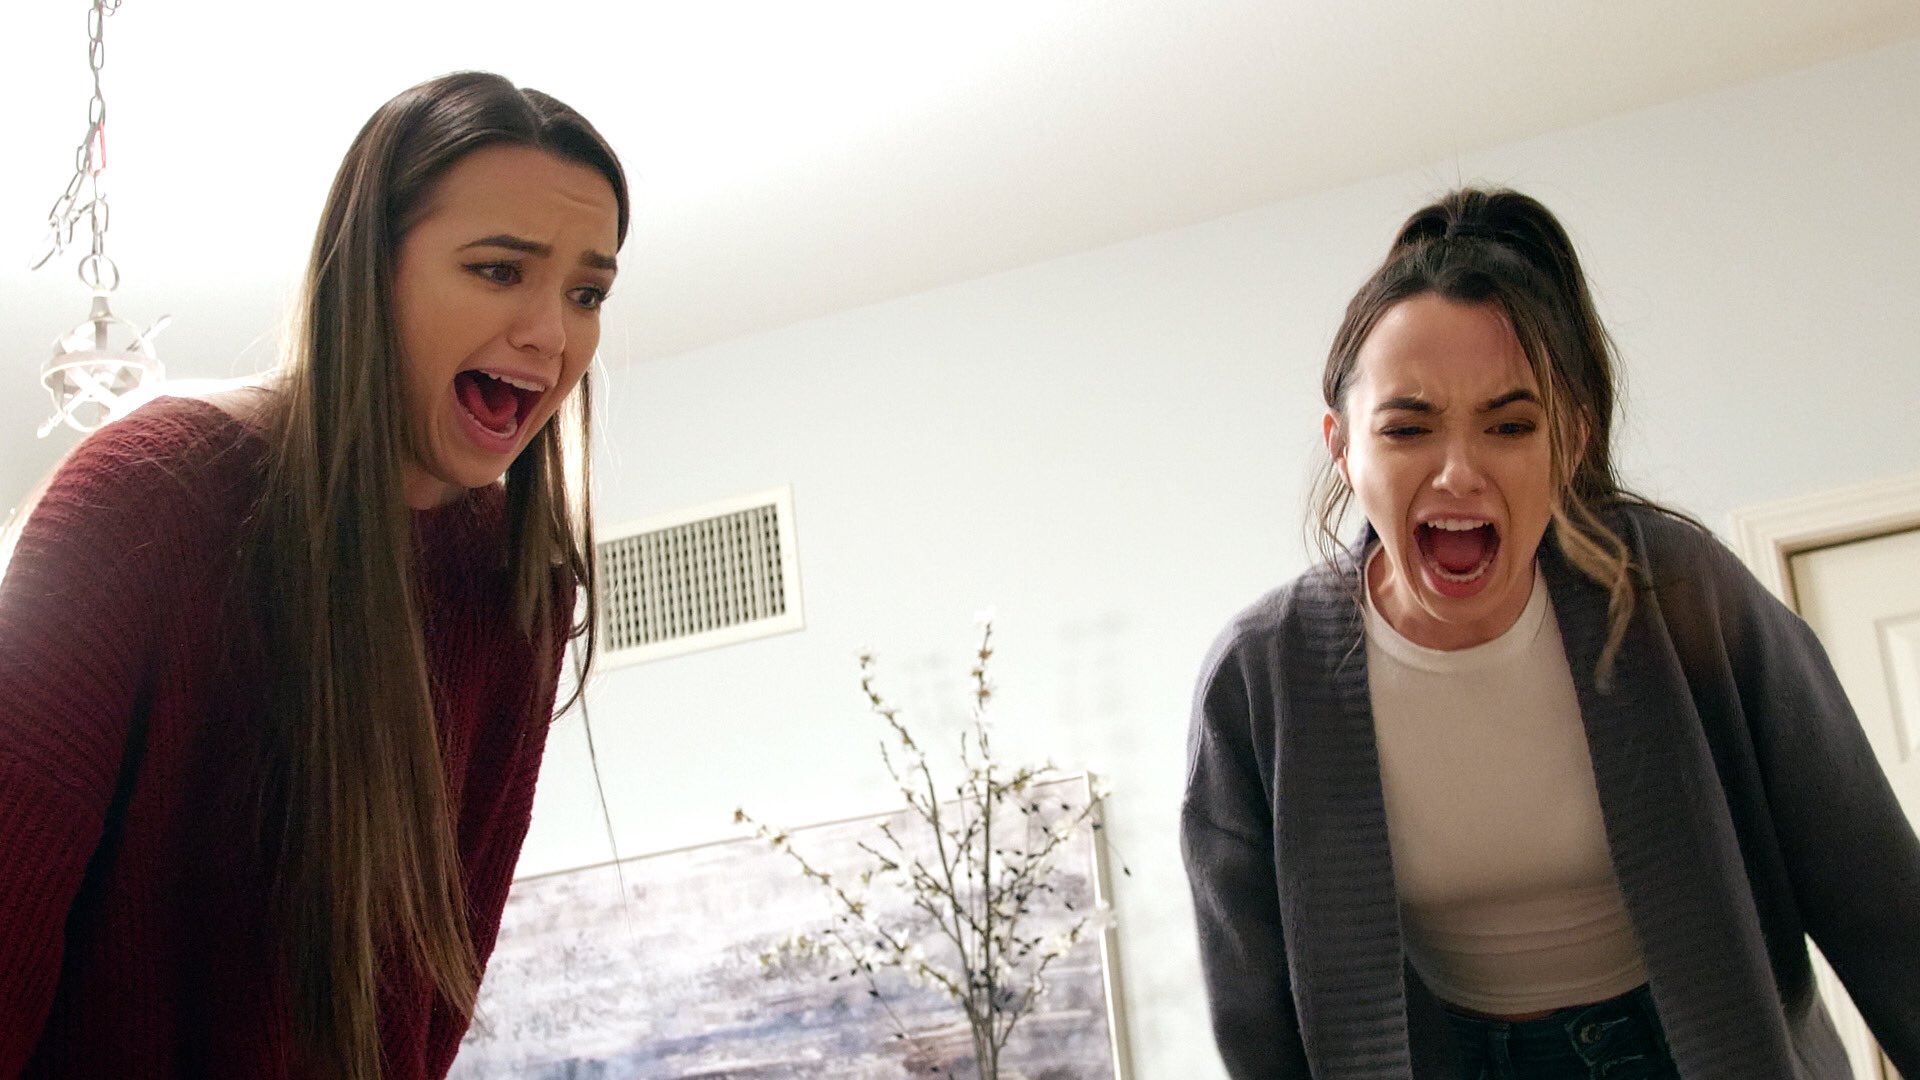 Merrell Twins on Twitter: "We are doing another premiere at 4:00 PM PST of our video coming out TOMORROW! Can you guess happening in this screenshot from tomorrow's video? /